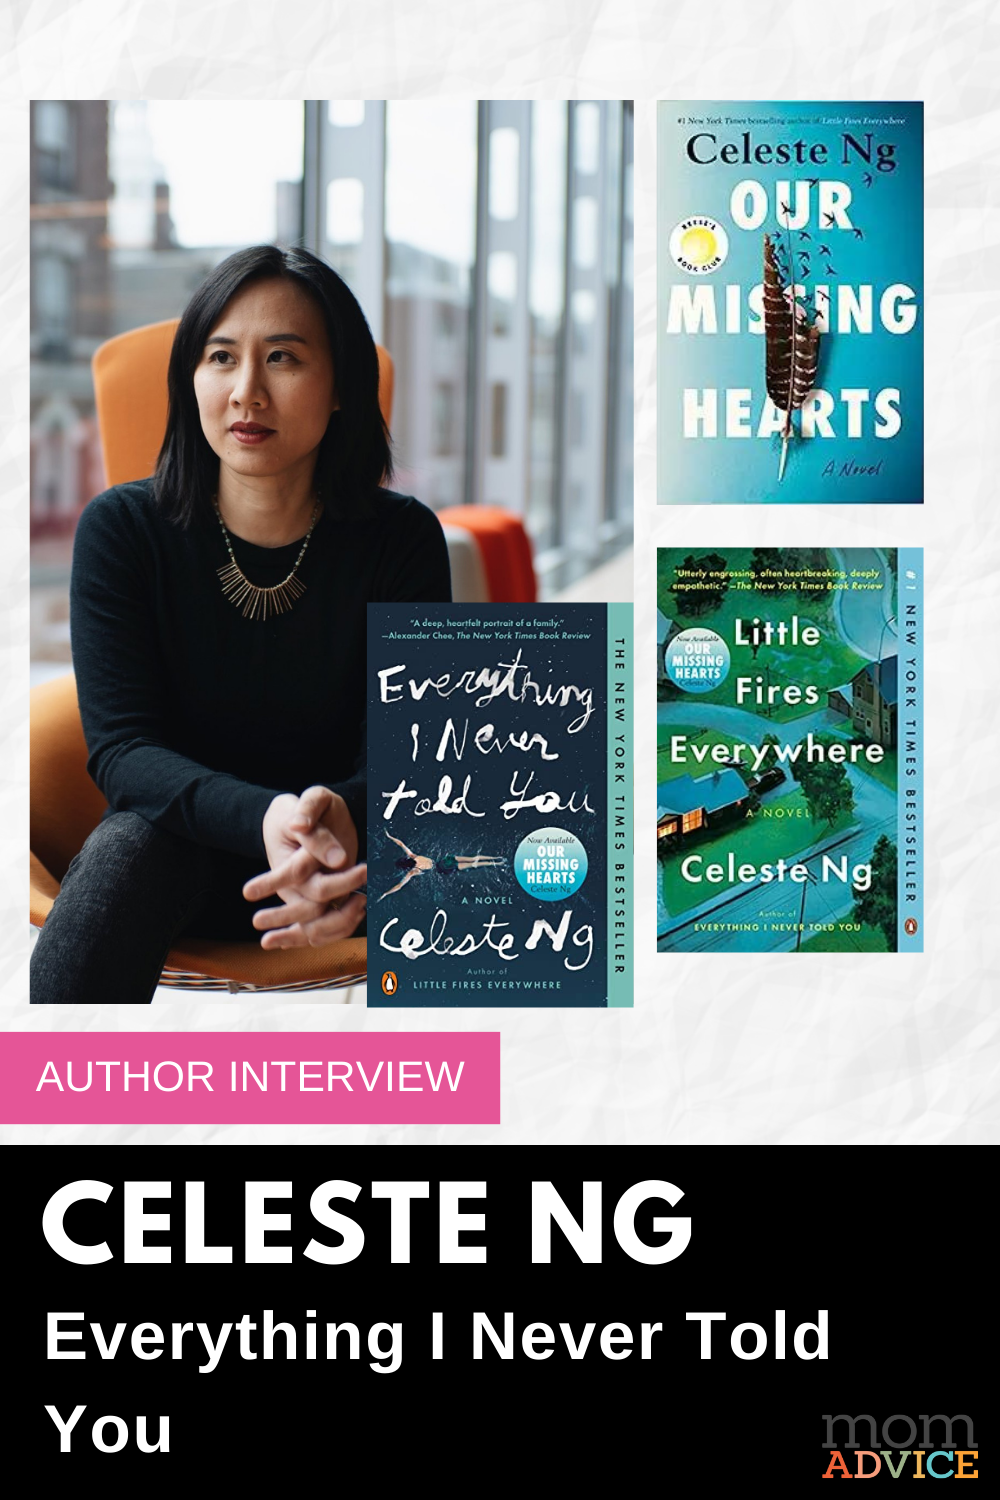 Guide to the Celeste Ng Books and Exclusive Author Interview